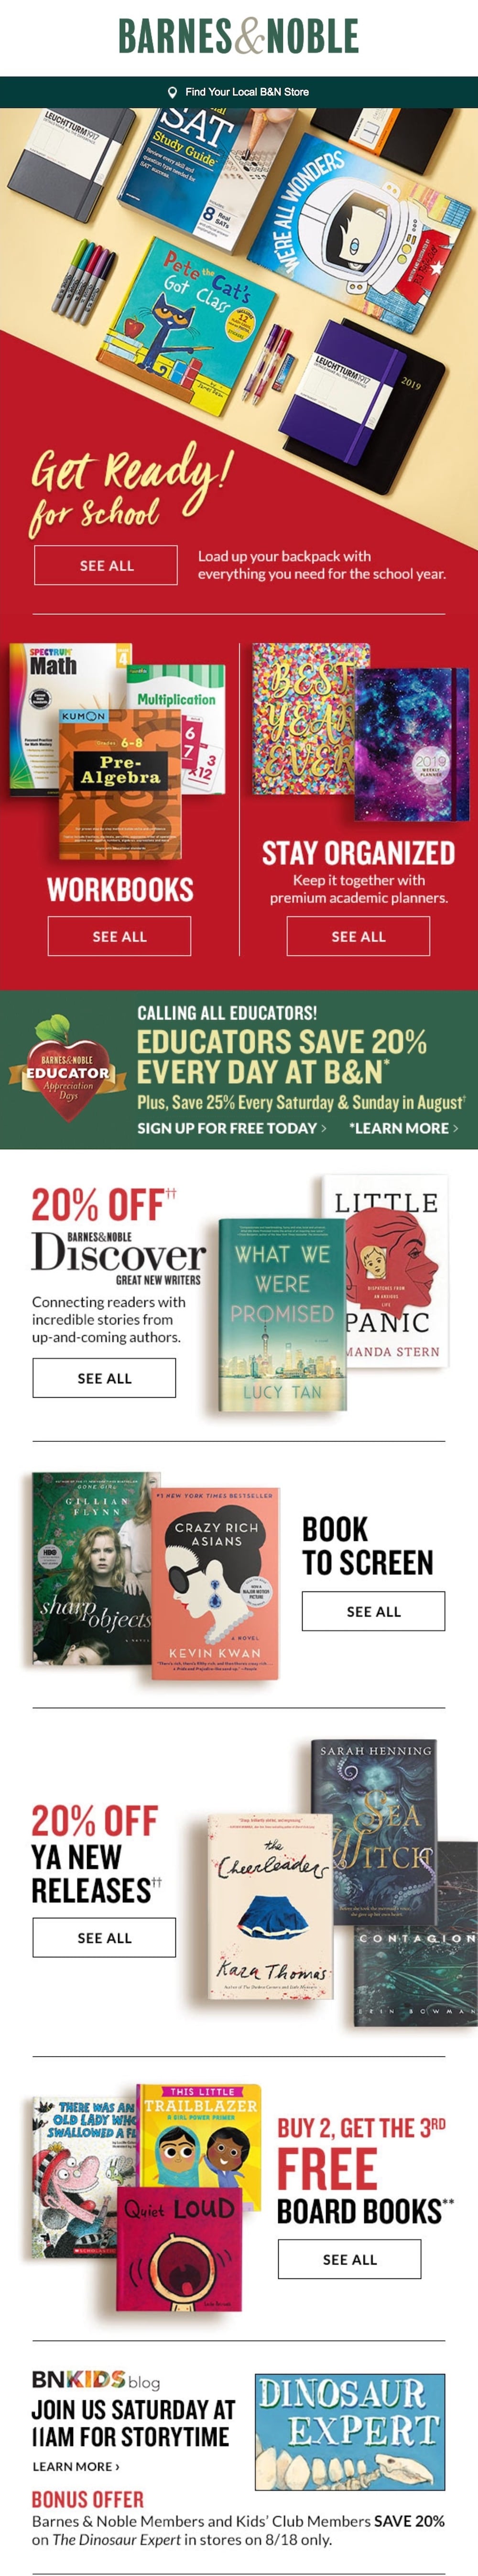 A back-to-school email campaign from Barnes and Noble